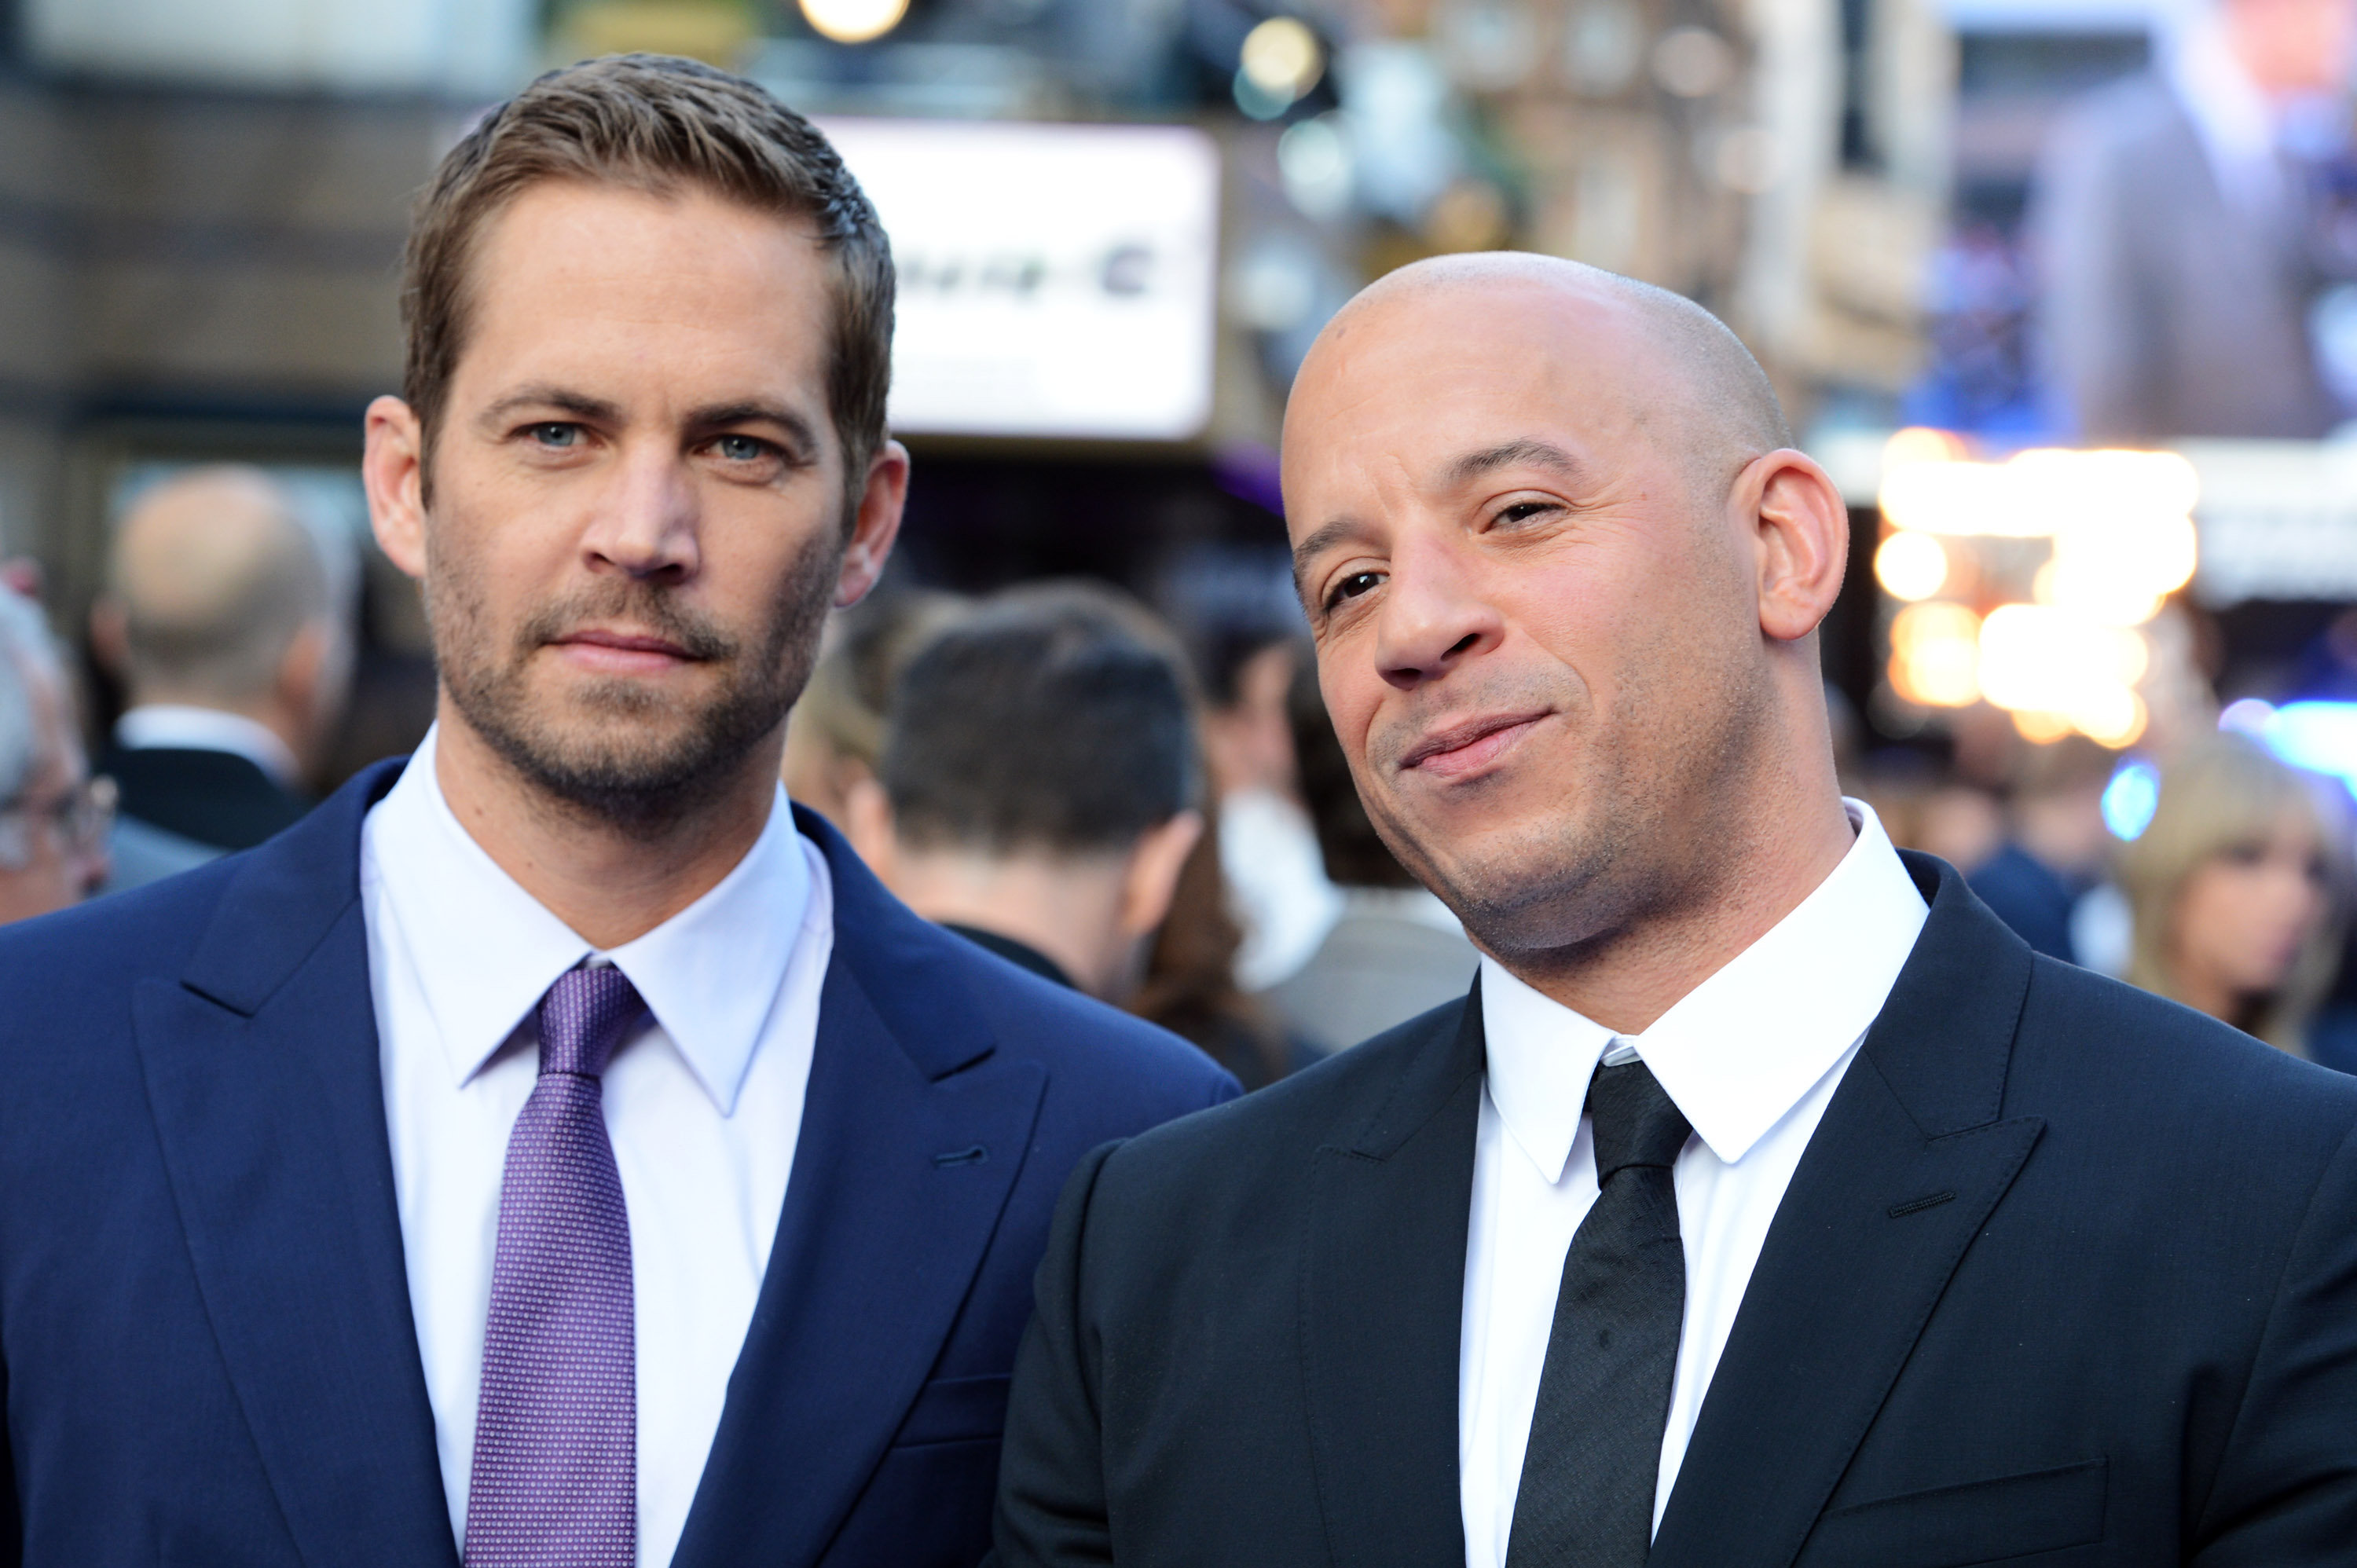 Paul Walker (L) and Vin Diesel attend the world premiere of 'Fast And Furious 6' at The Empire Leicester Square on May 7, 2013 in London, England. (Dave Hogan—Getty Images)